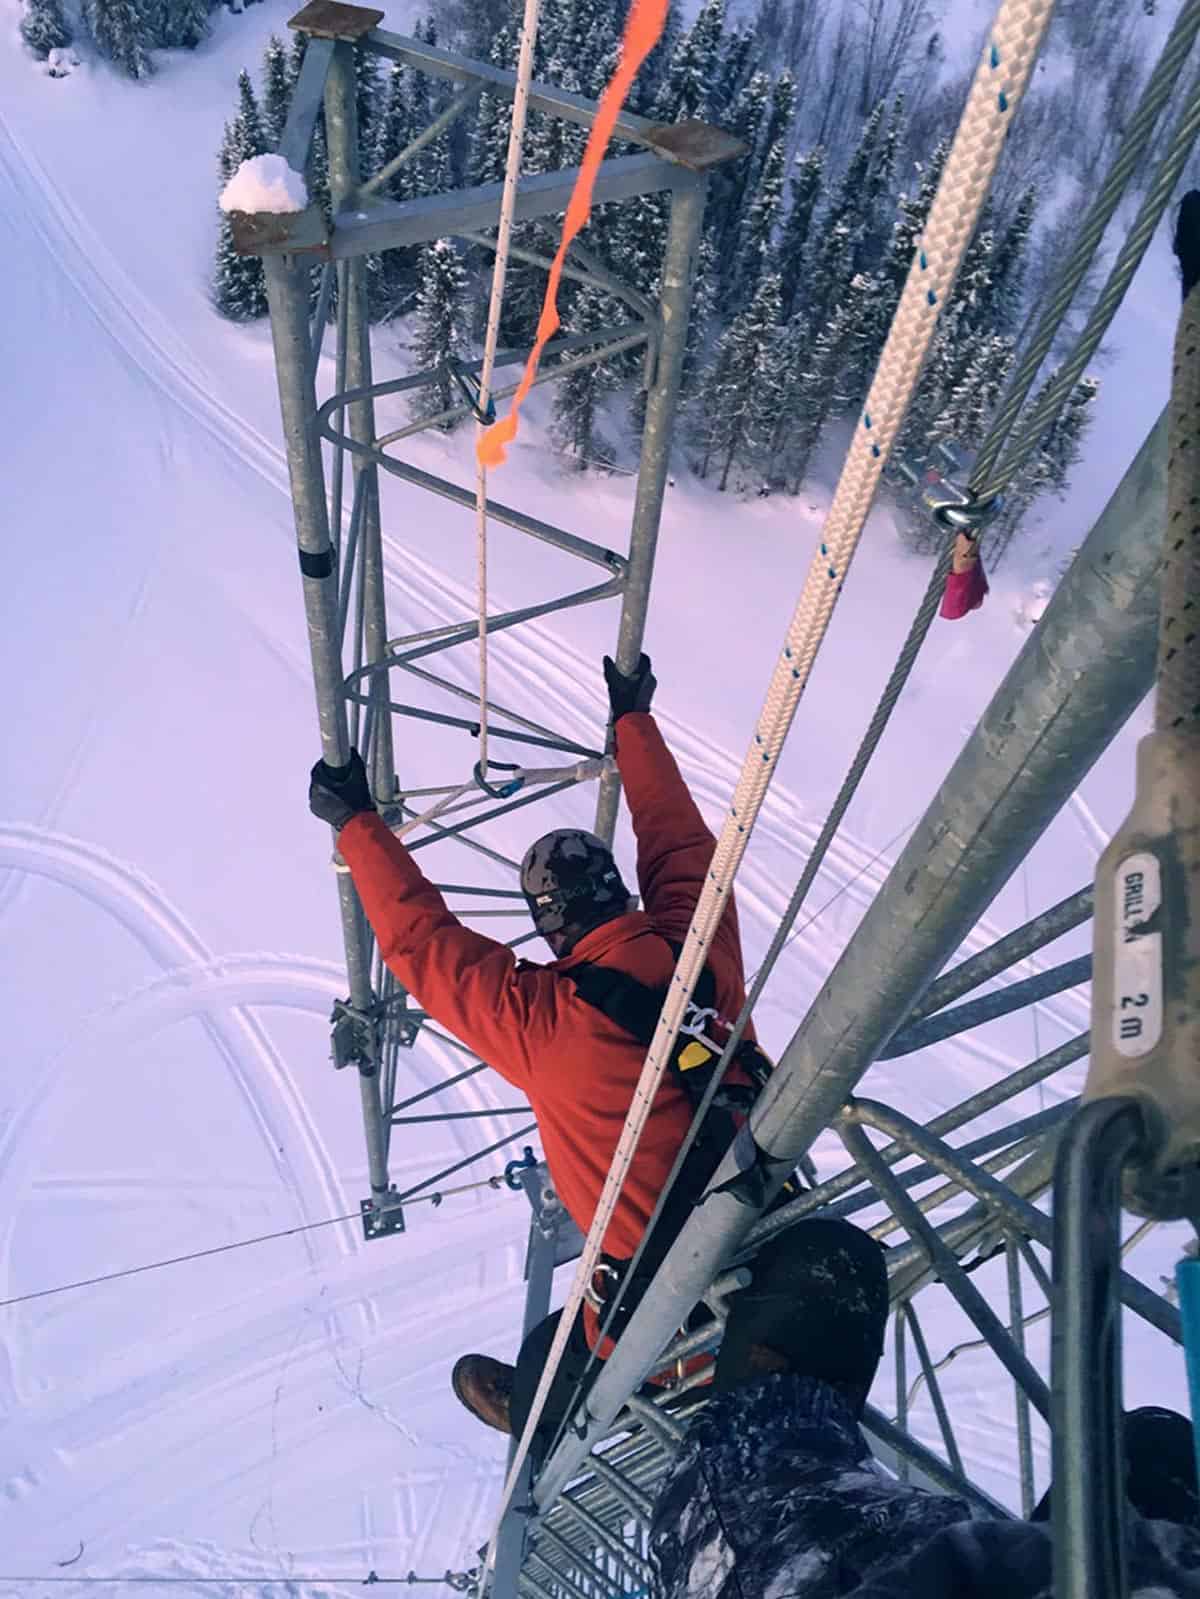 Leonardo DRS employee using a pulley system to move equipment at the top of an electrical tower